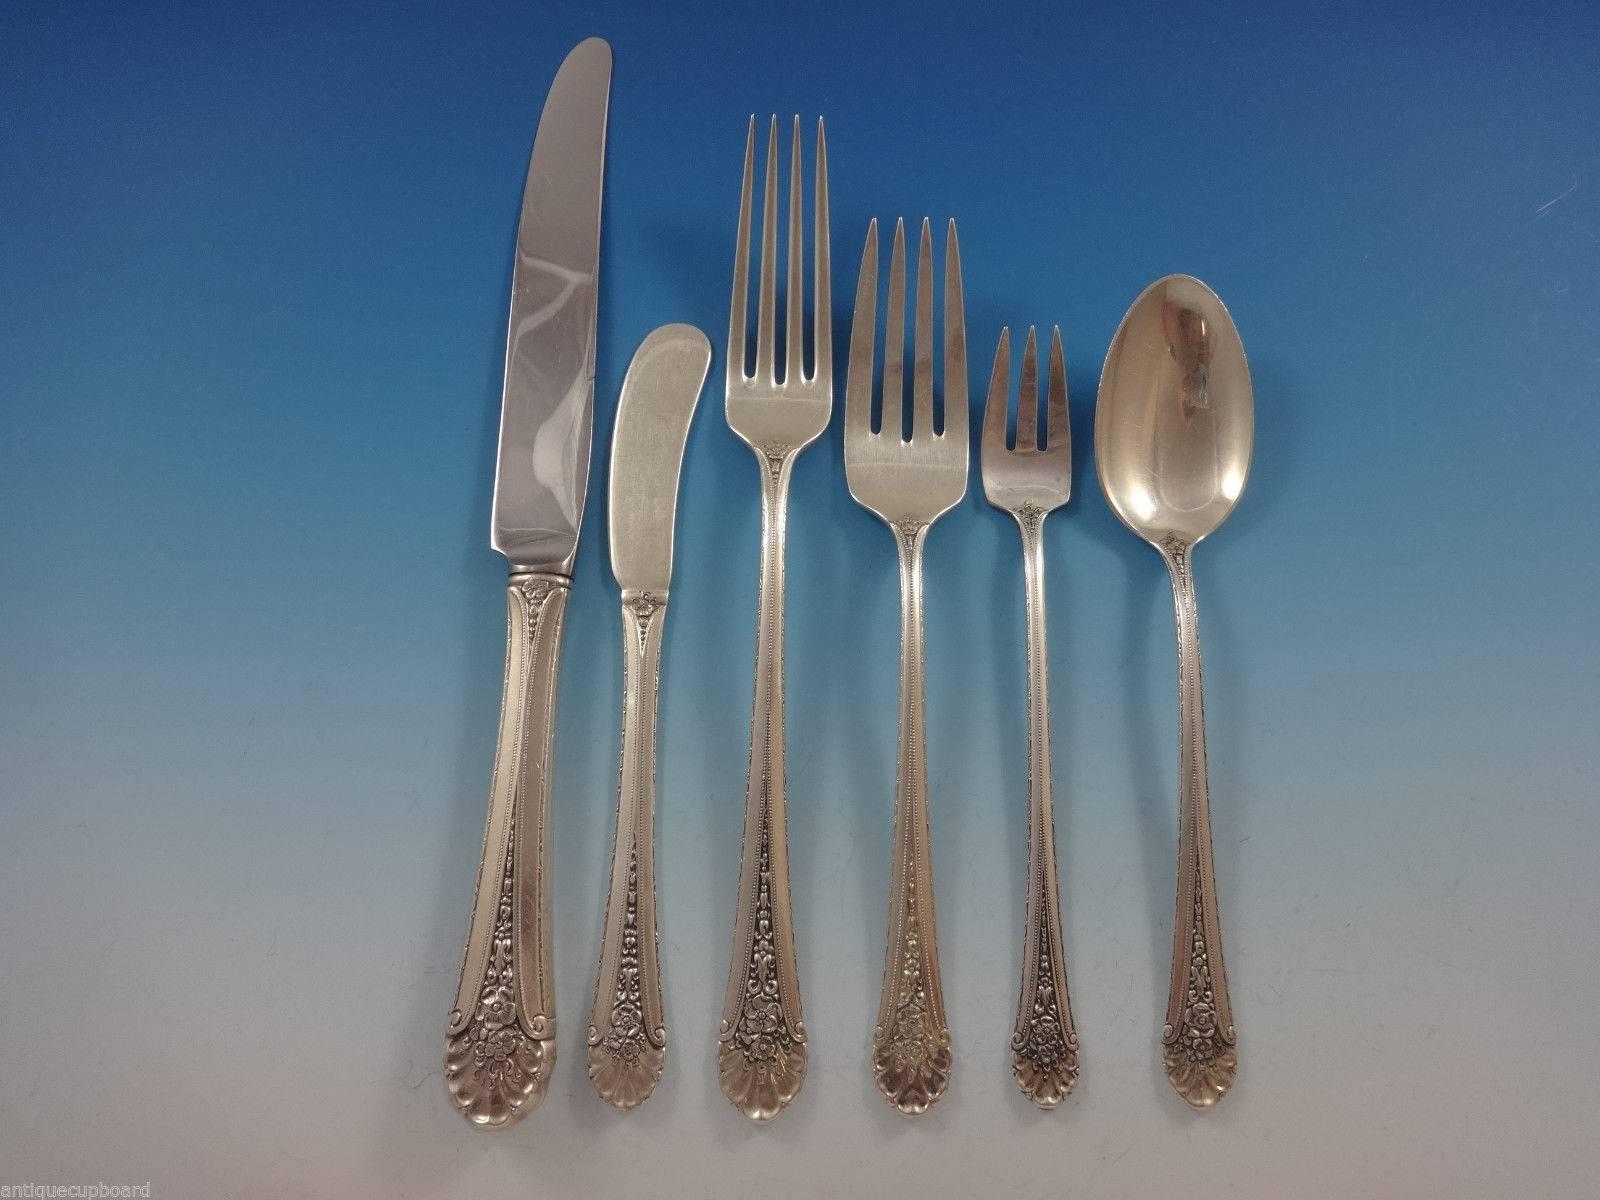 Beautiful Royal Windsor by Towle sterling silver Flatware set, 53 pieces. This set includes:

8 Knives 8 3/4